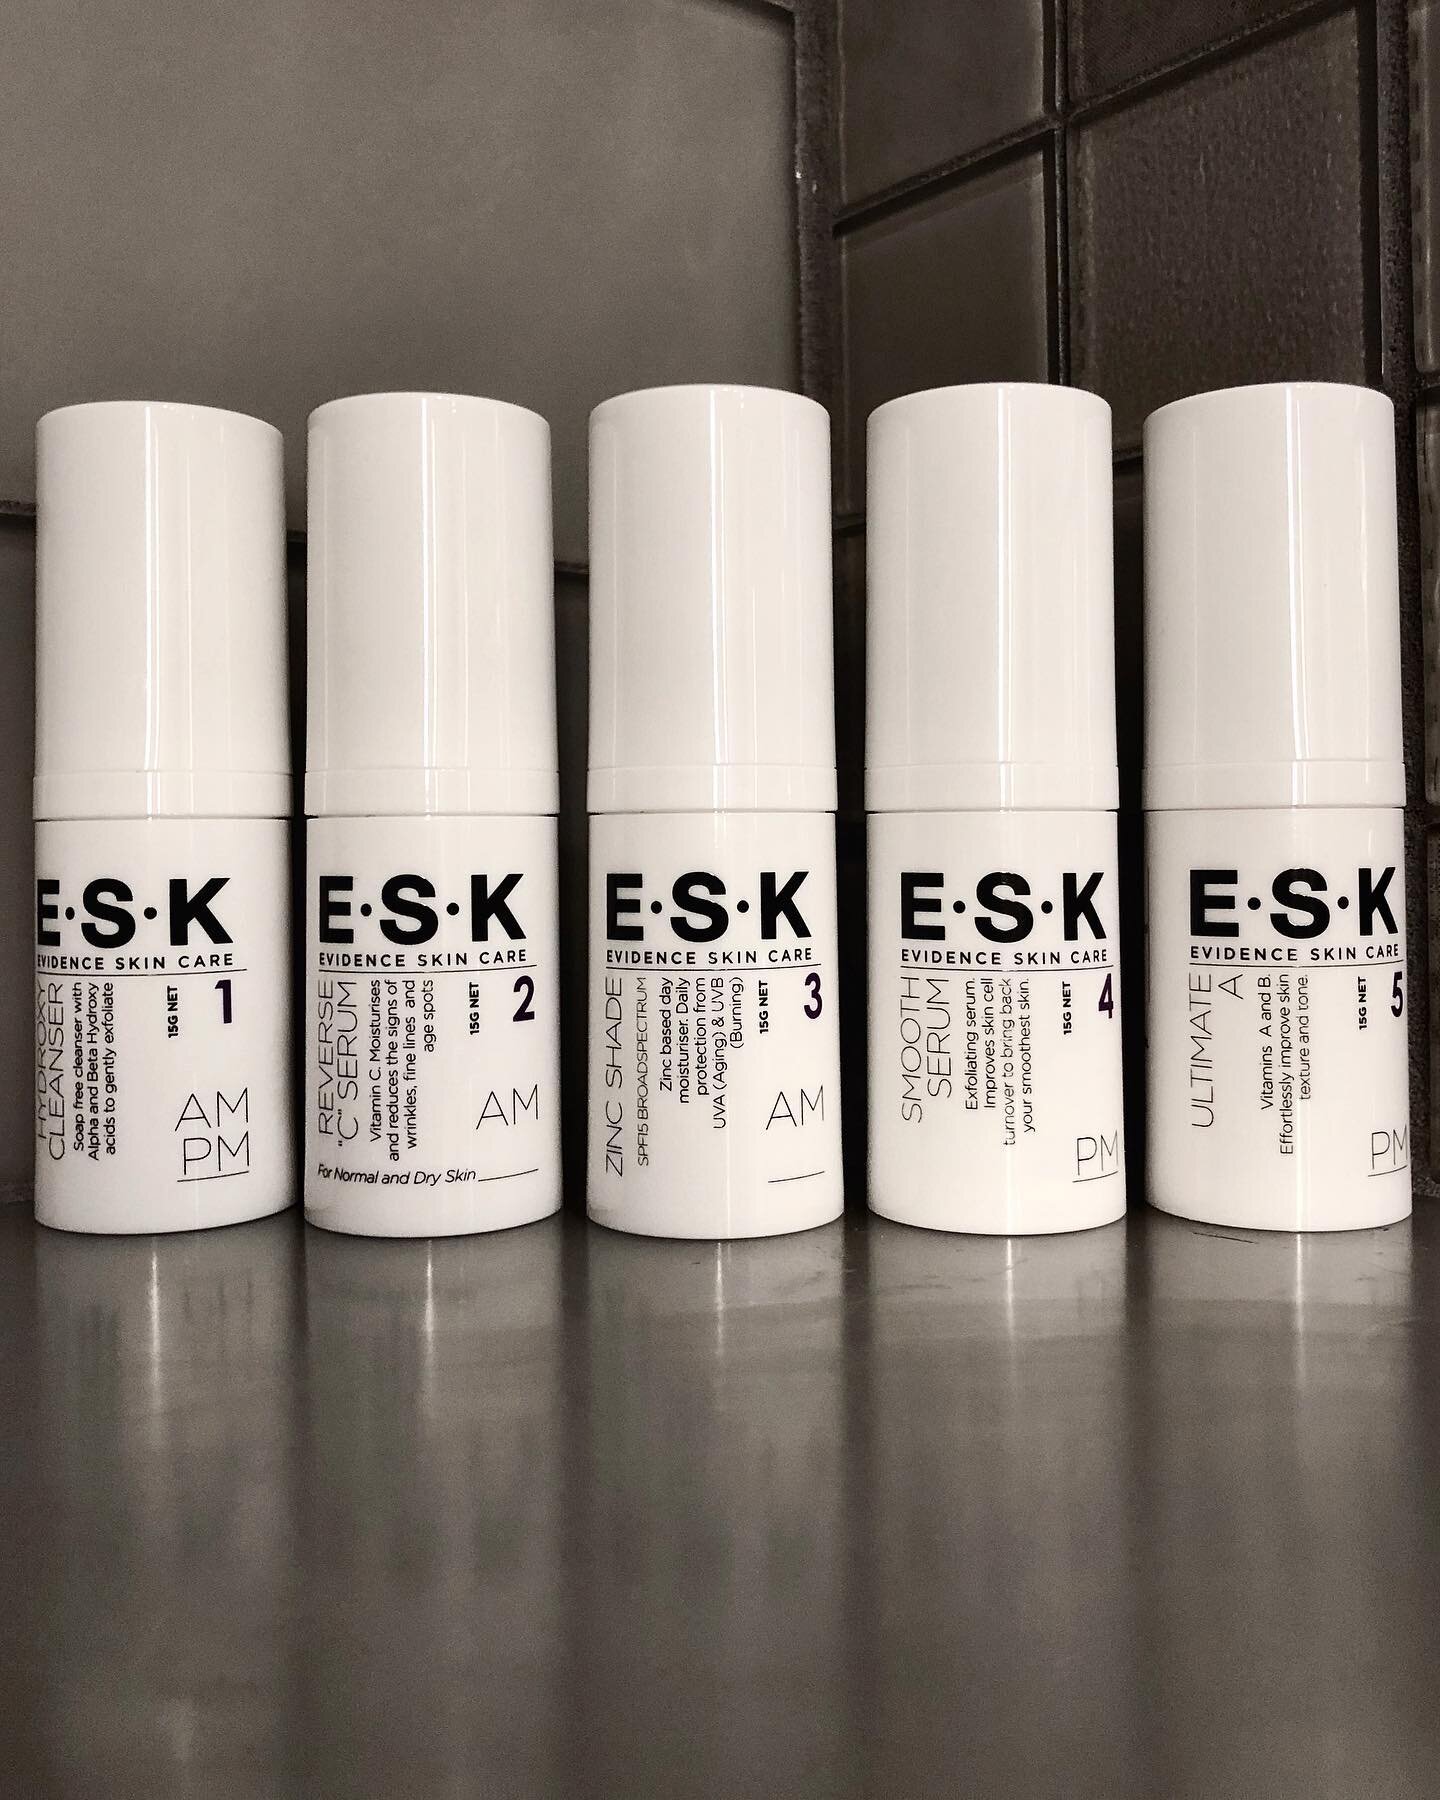 If you&rsquo;re like me and WAY overpack your skincare essentials and toiletries while traveling, then you&rsquo;re going to love this brand - @eskskincare offers total skincare regimens in convenient travel sizes that make it easier than ever to tak